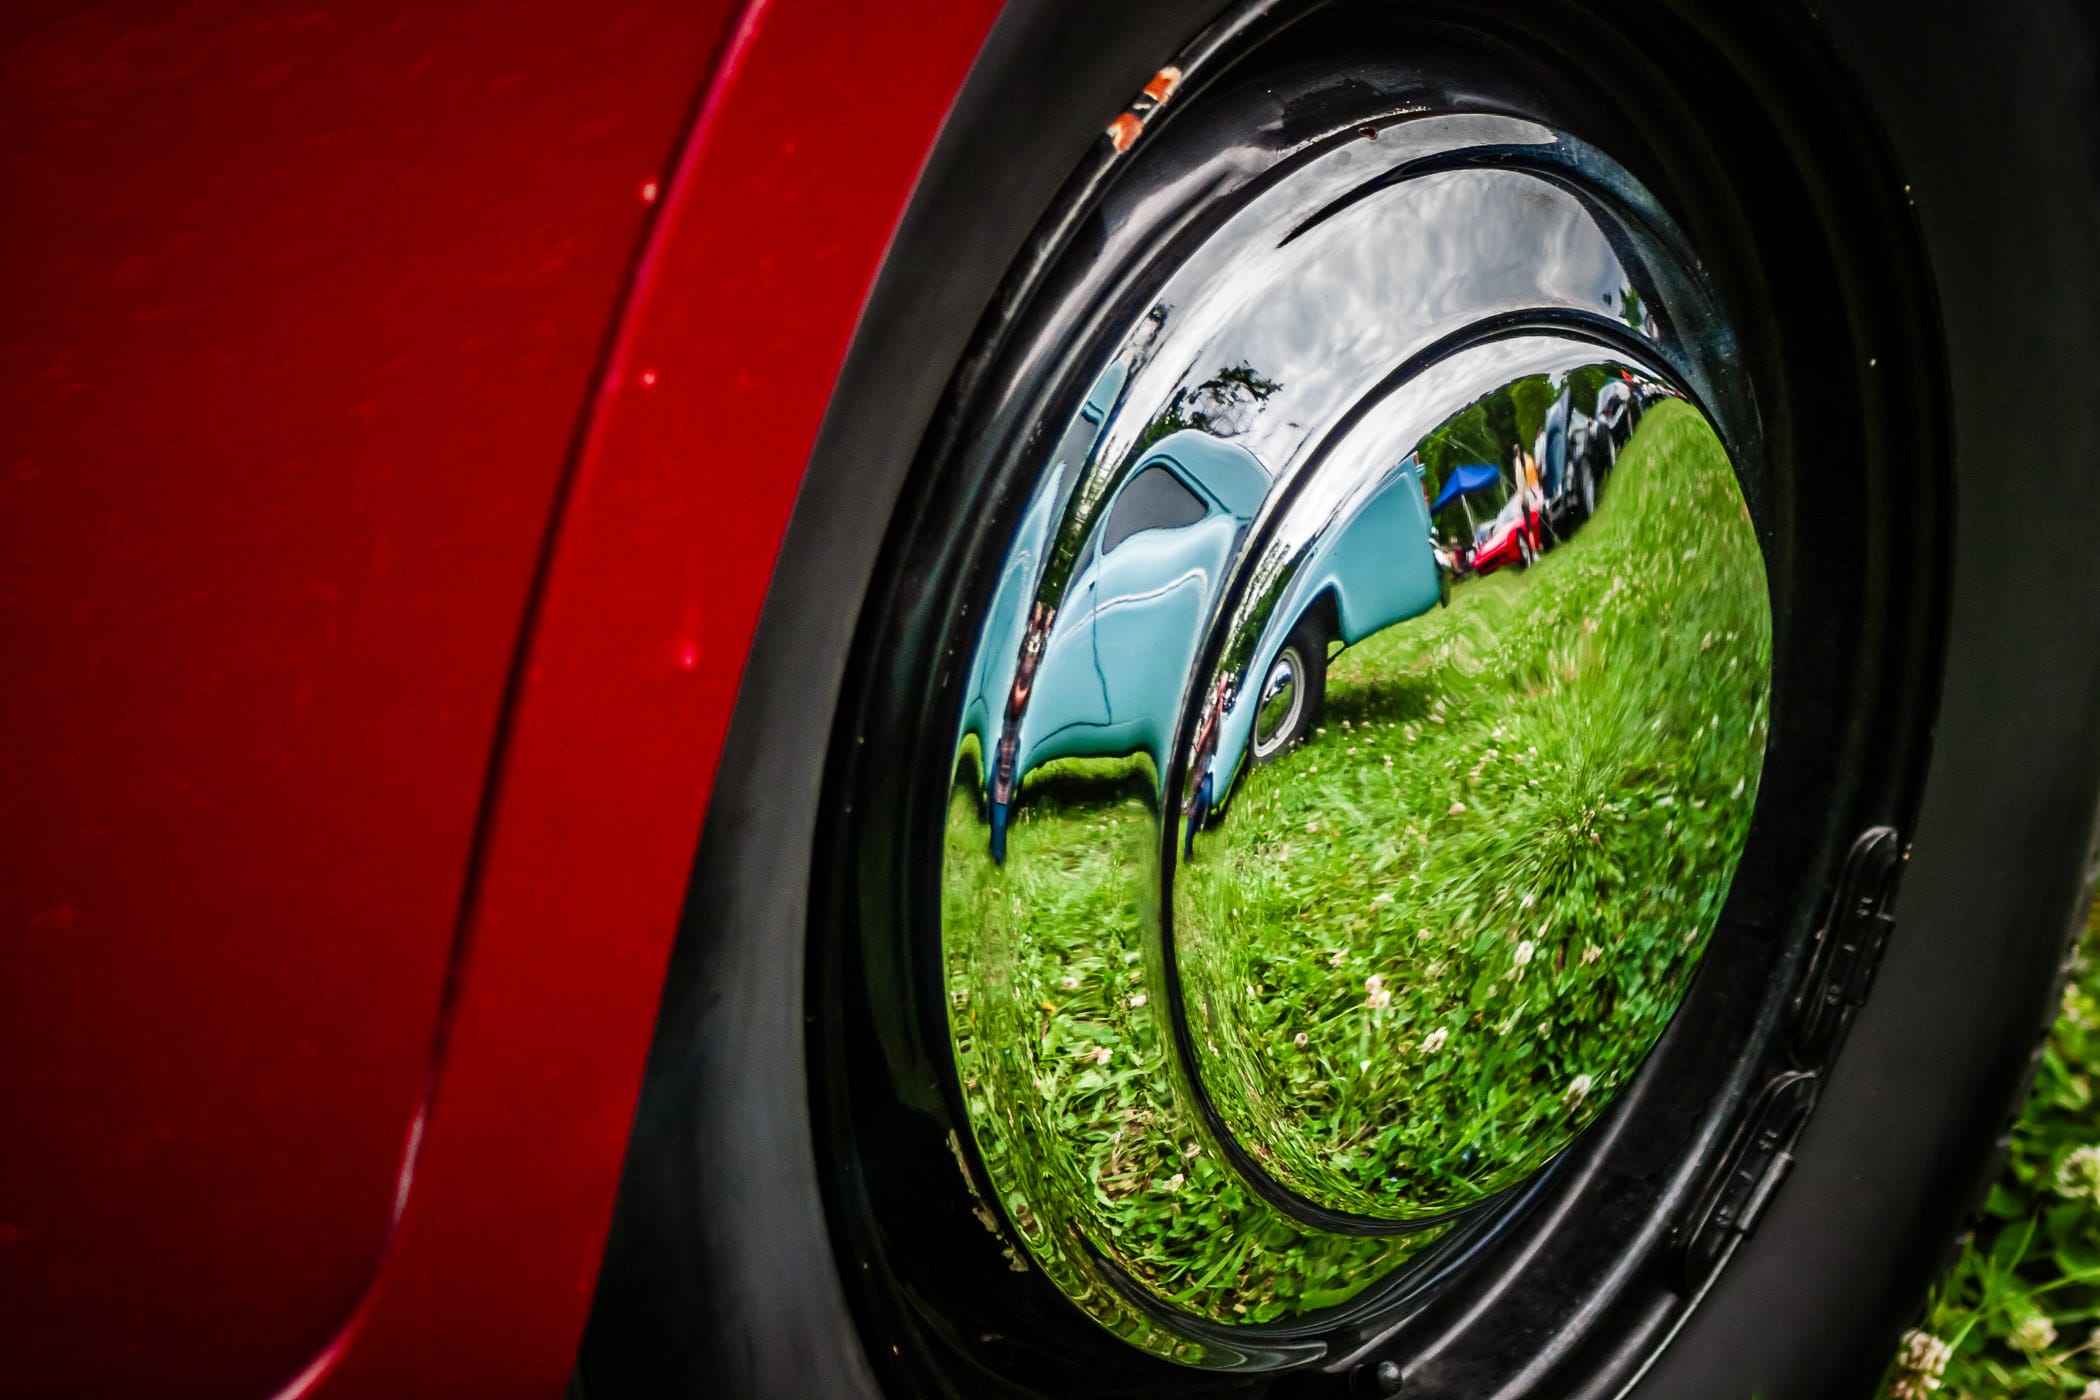 Classic cars (and, if you look closely, the photographer) reflected in the polished chrome wheel of a Sunbeam Talbot 90 at Dallas' All British and European Car Day.